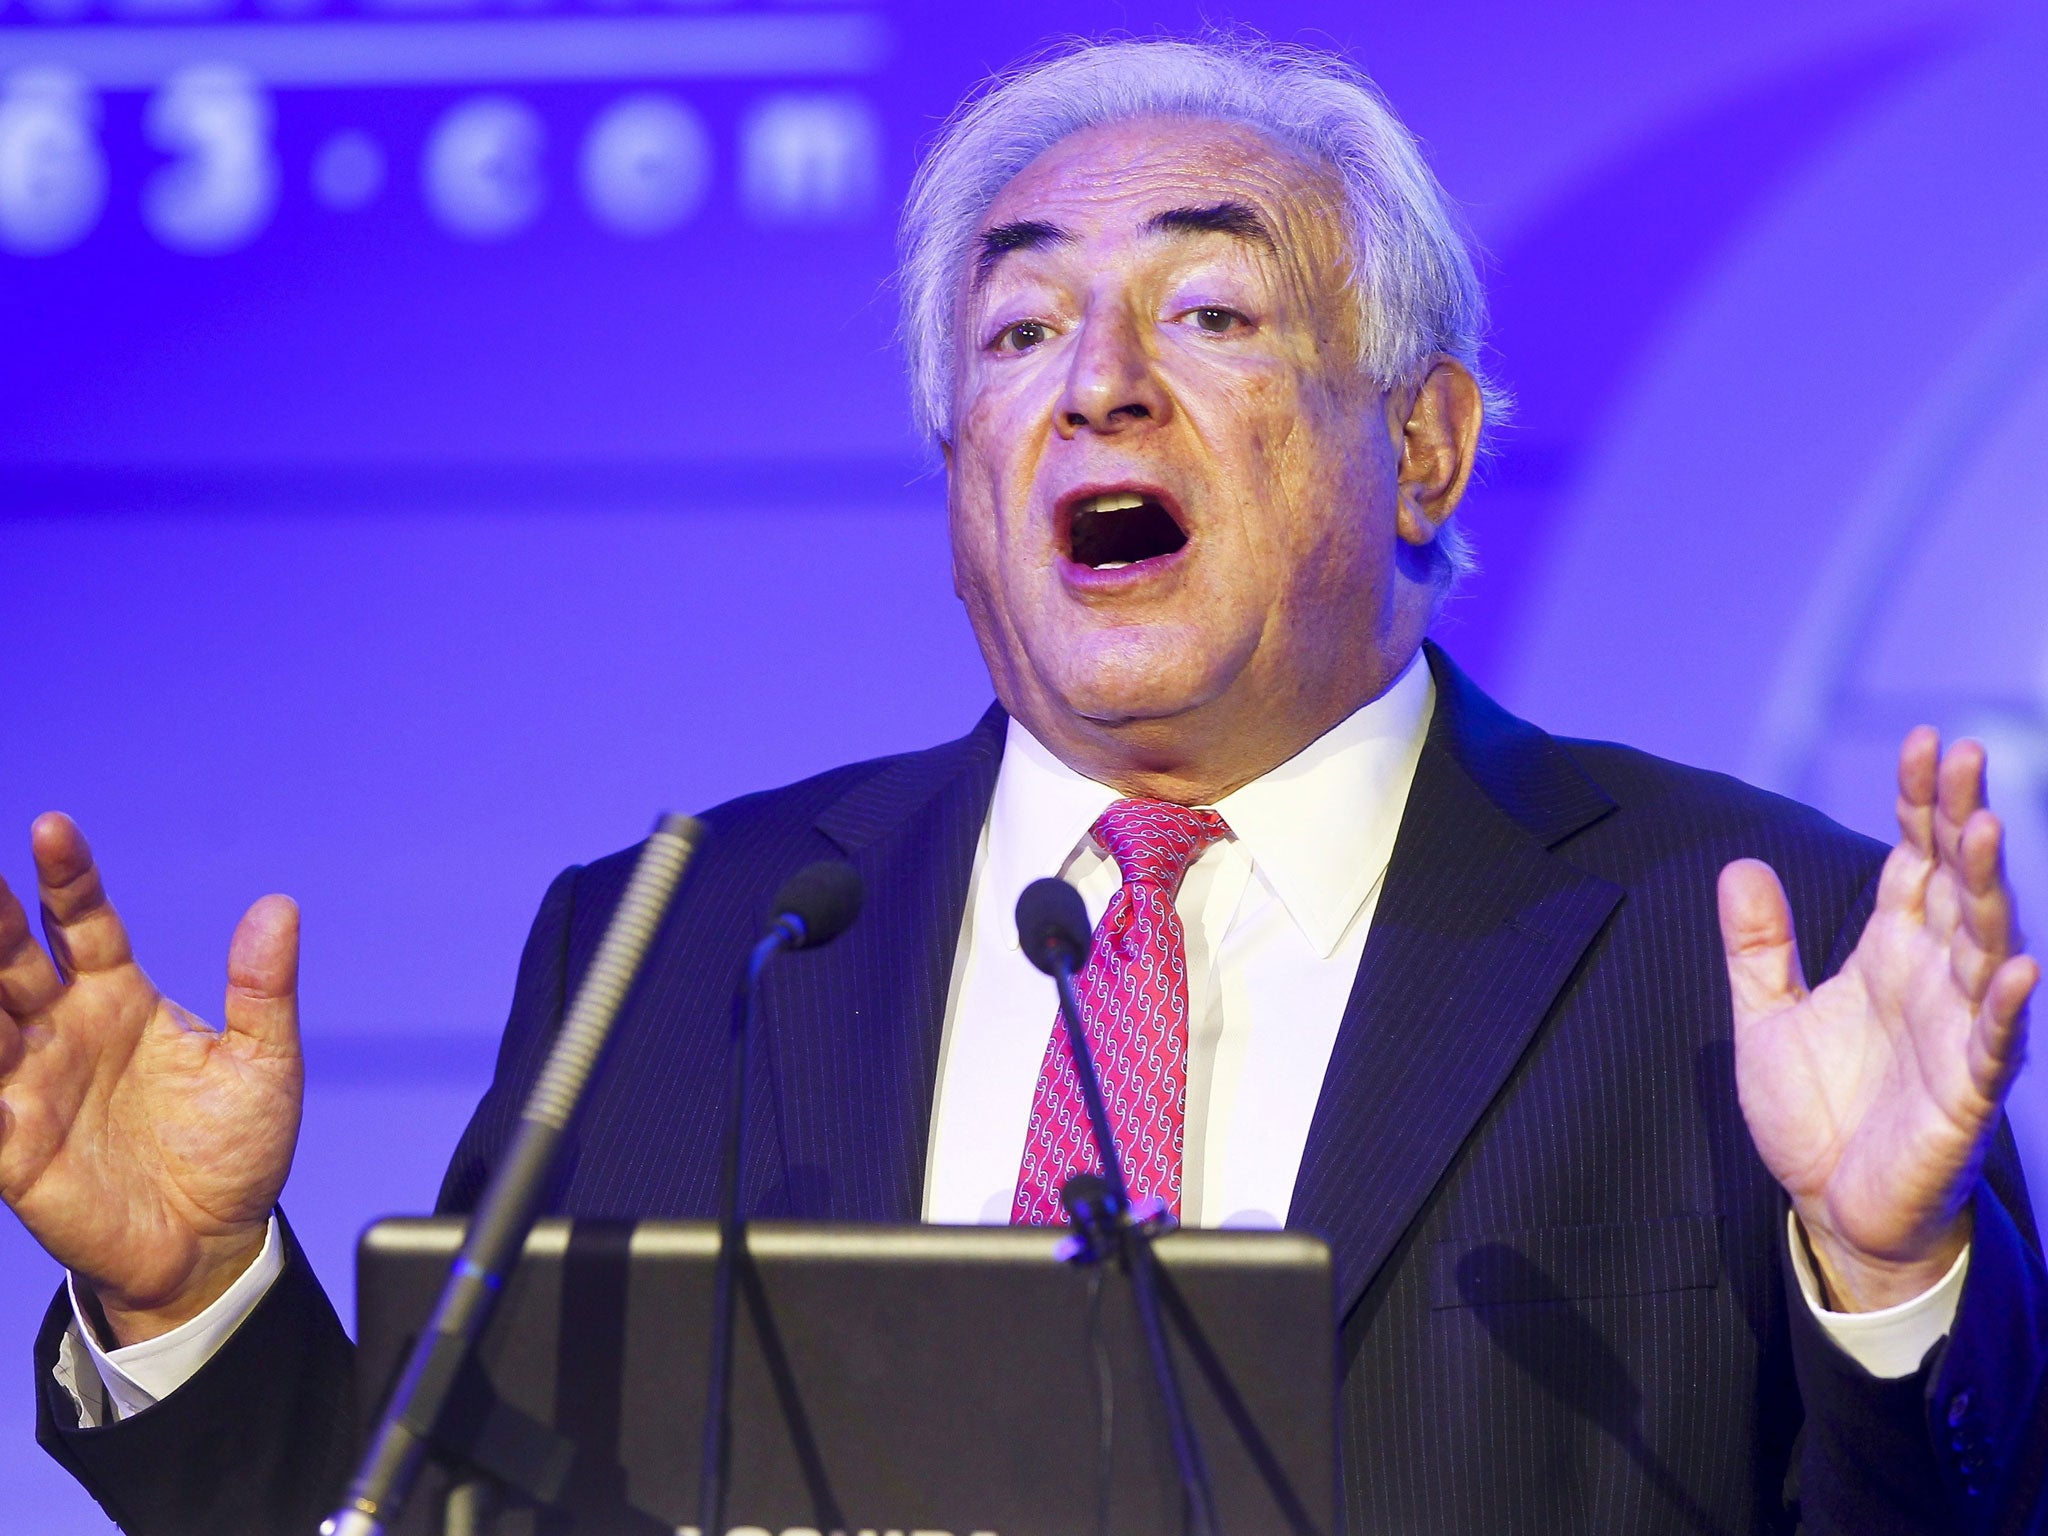 Dominique Strauss-Kahn failed to end the criminal investigation into his alleged role in organising sex parties with prostitutes in the US and France and Belgium